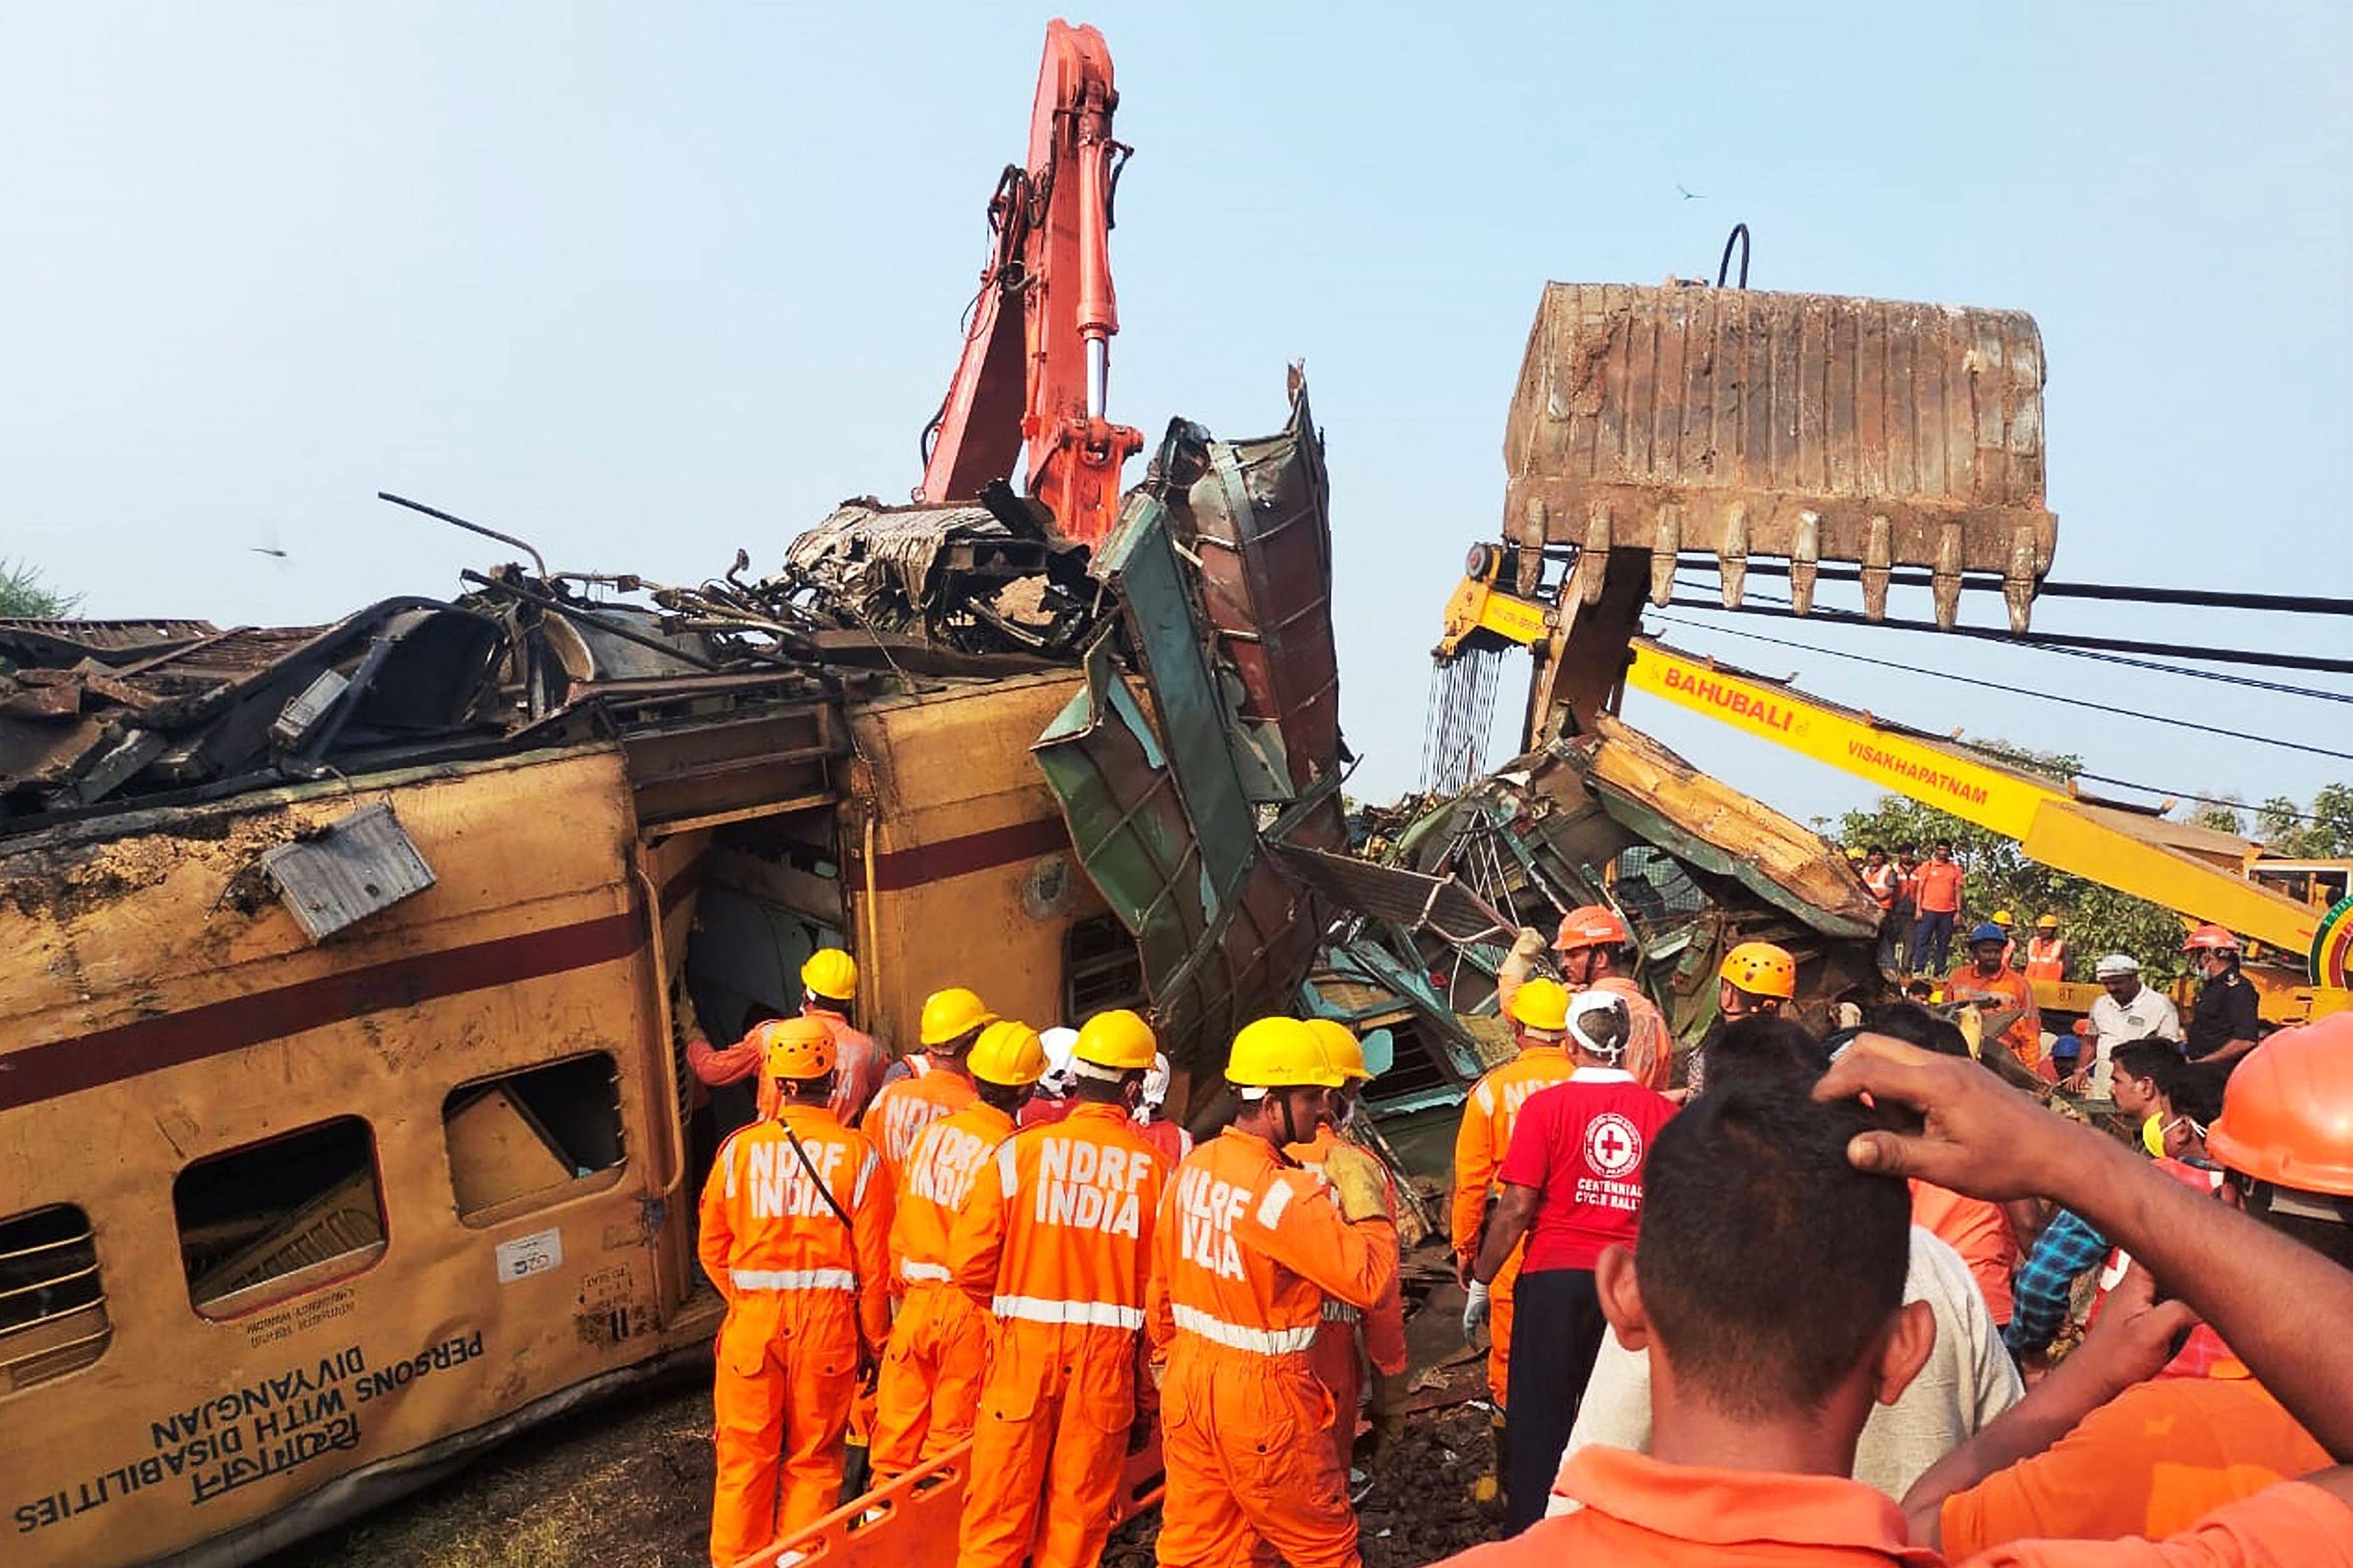 Rescuers from India’s National Disaster Response Force (NDRF) search the site of the fatal train crash in Vizianagaram district of India’s Andhra Pradesh on October 30 last year. Photo: AFP